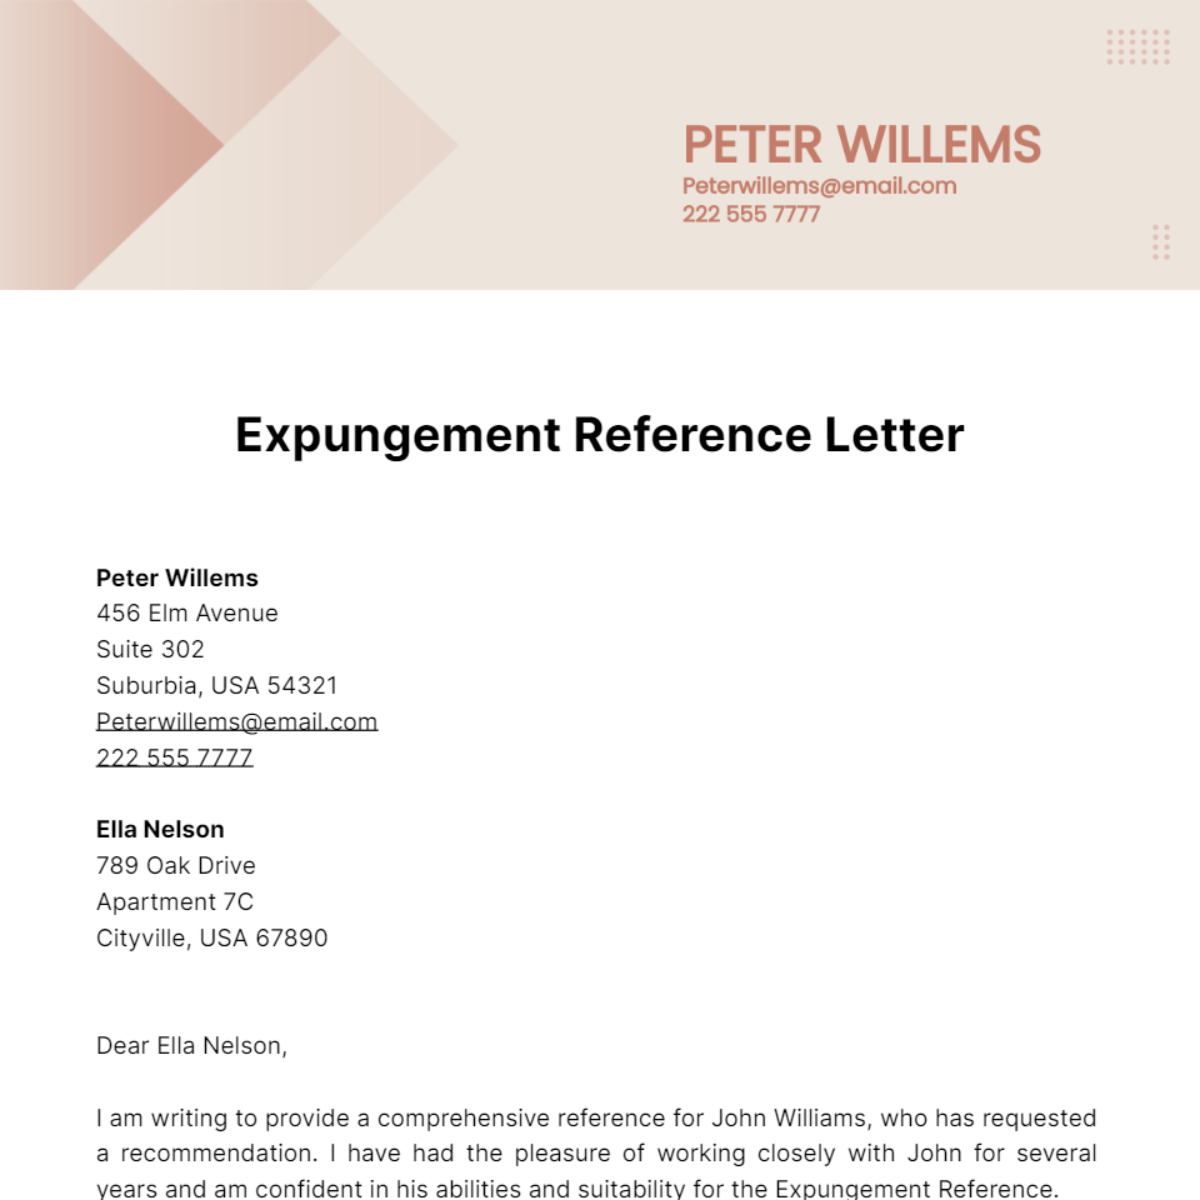 Expungement Reference Letter Template